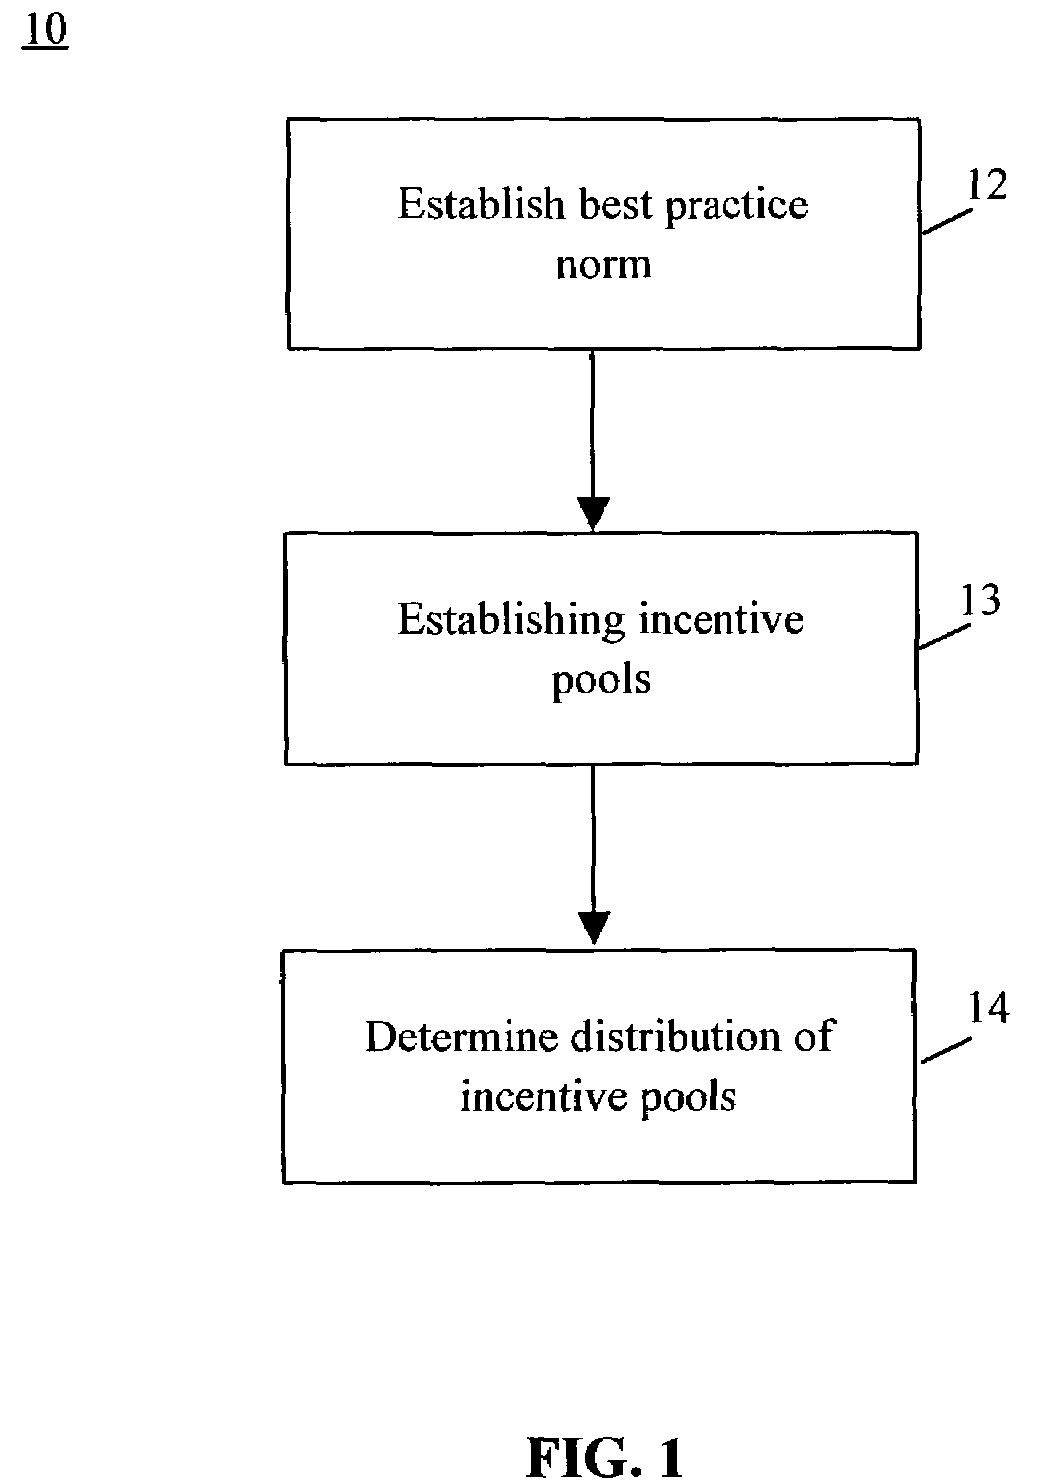 Method and system for gainsharing of physician services